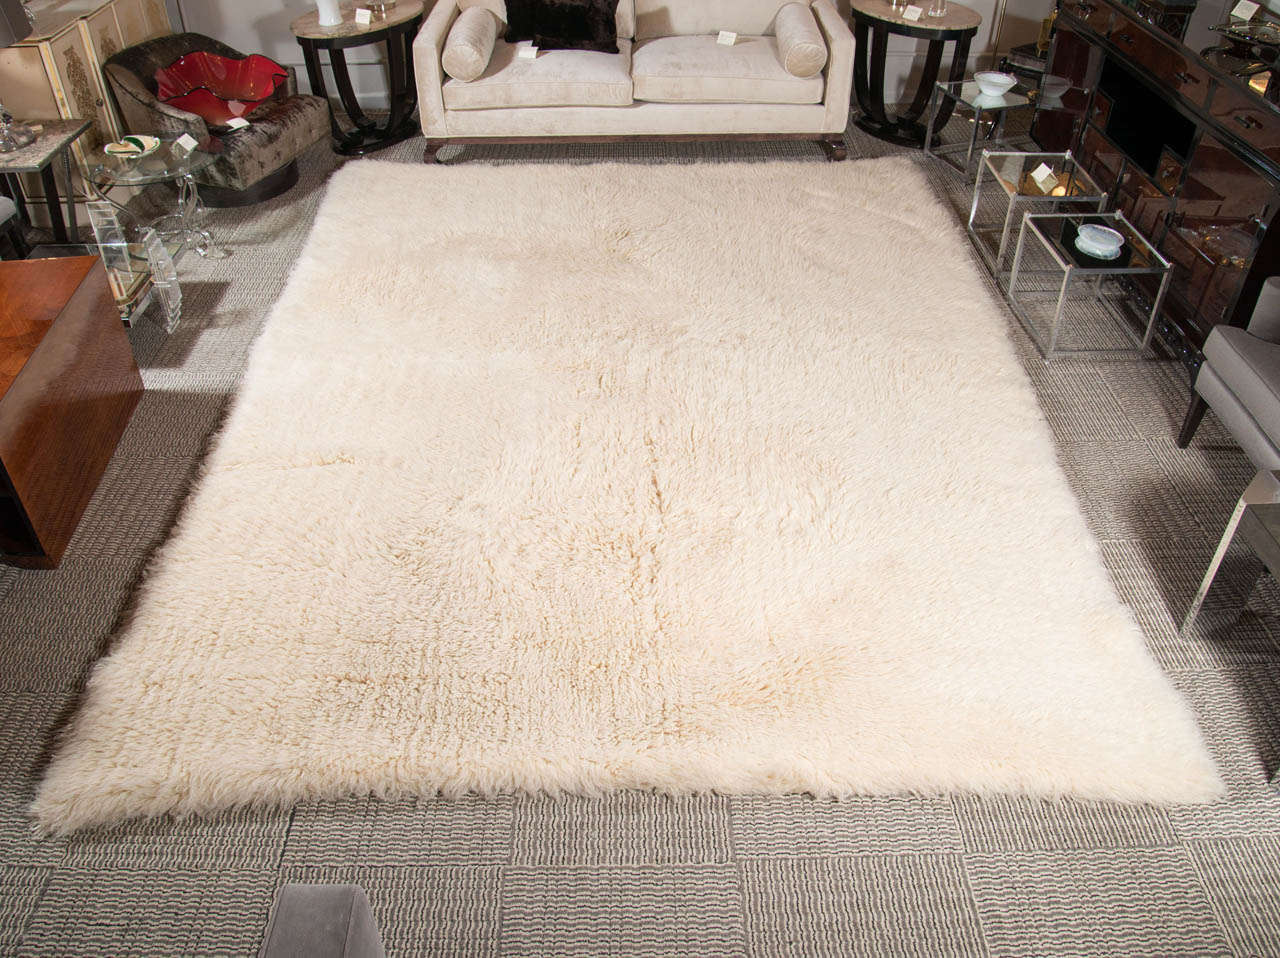 A luxurious 9 x 12 genuine Mazarakis Flokati rug.  It is made of 100% New Zealand wool pile and is hand woven in Greece with a wool backing.  It has a high pile which gives a thick and luscious feel and look.